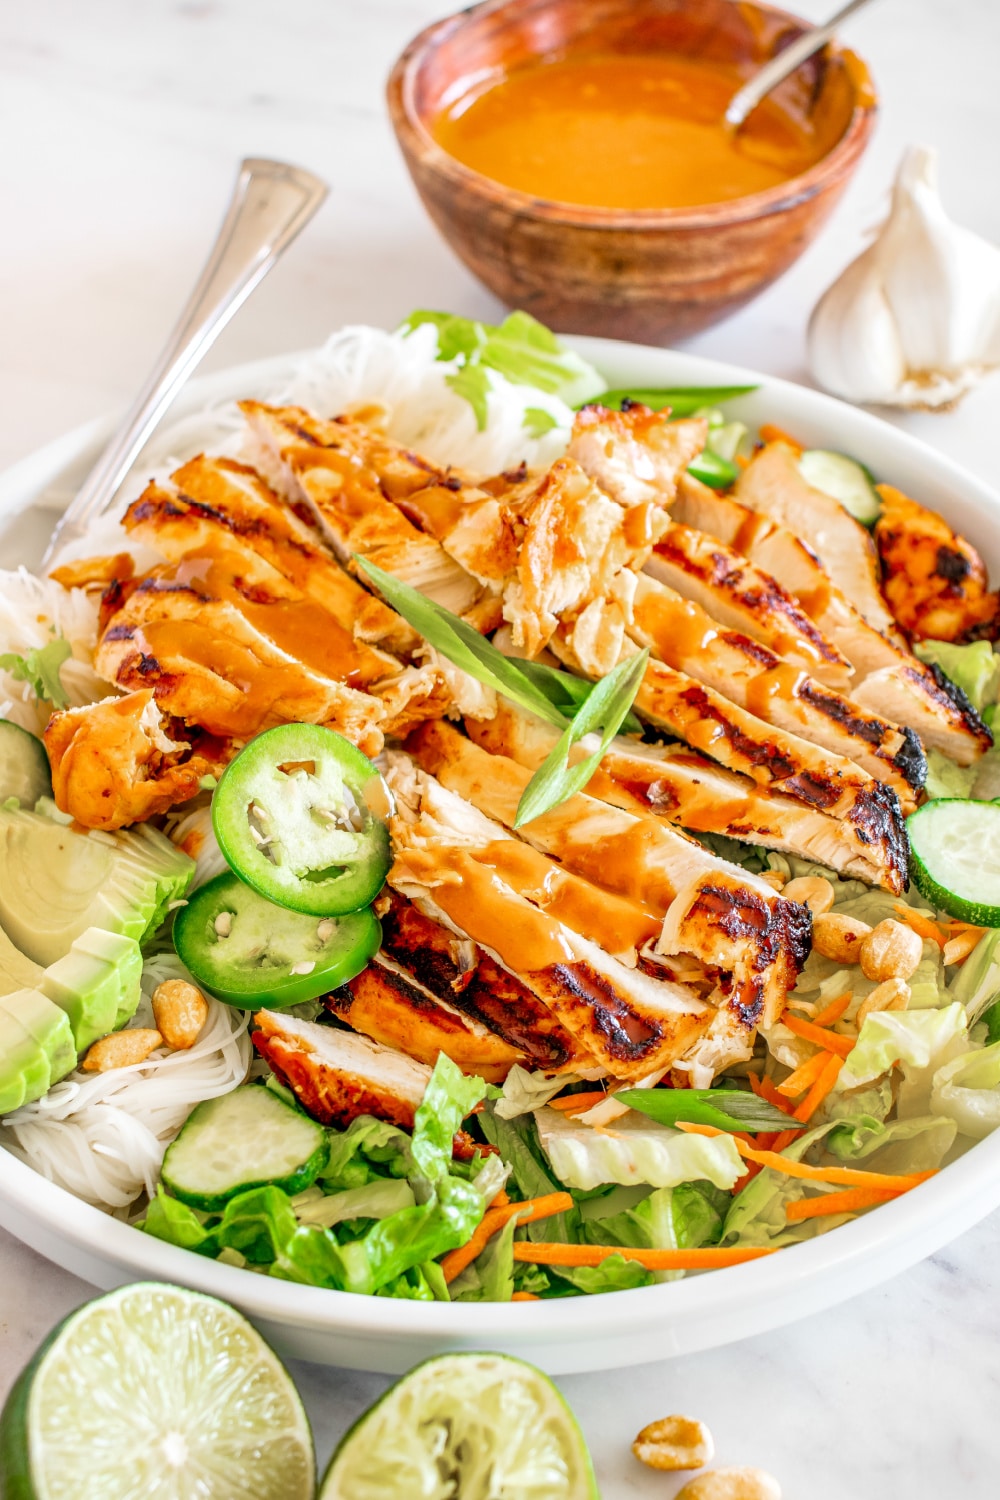 Spring Roll Chicken Salad in a white bowl.